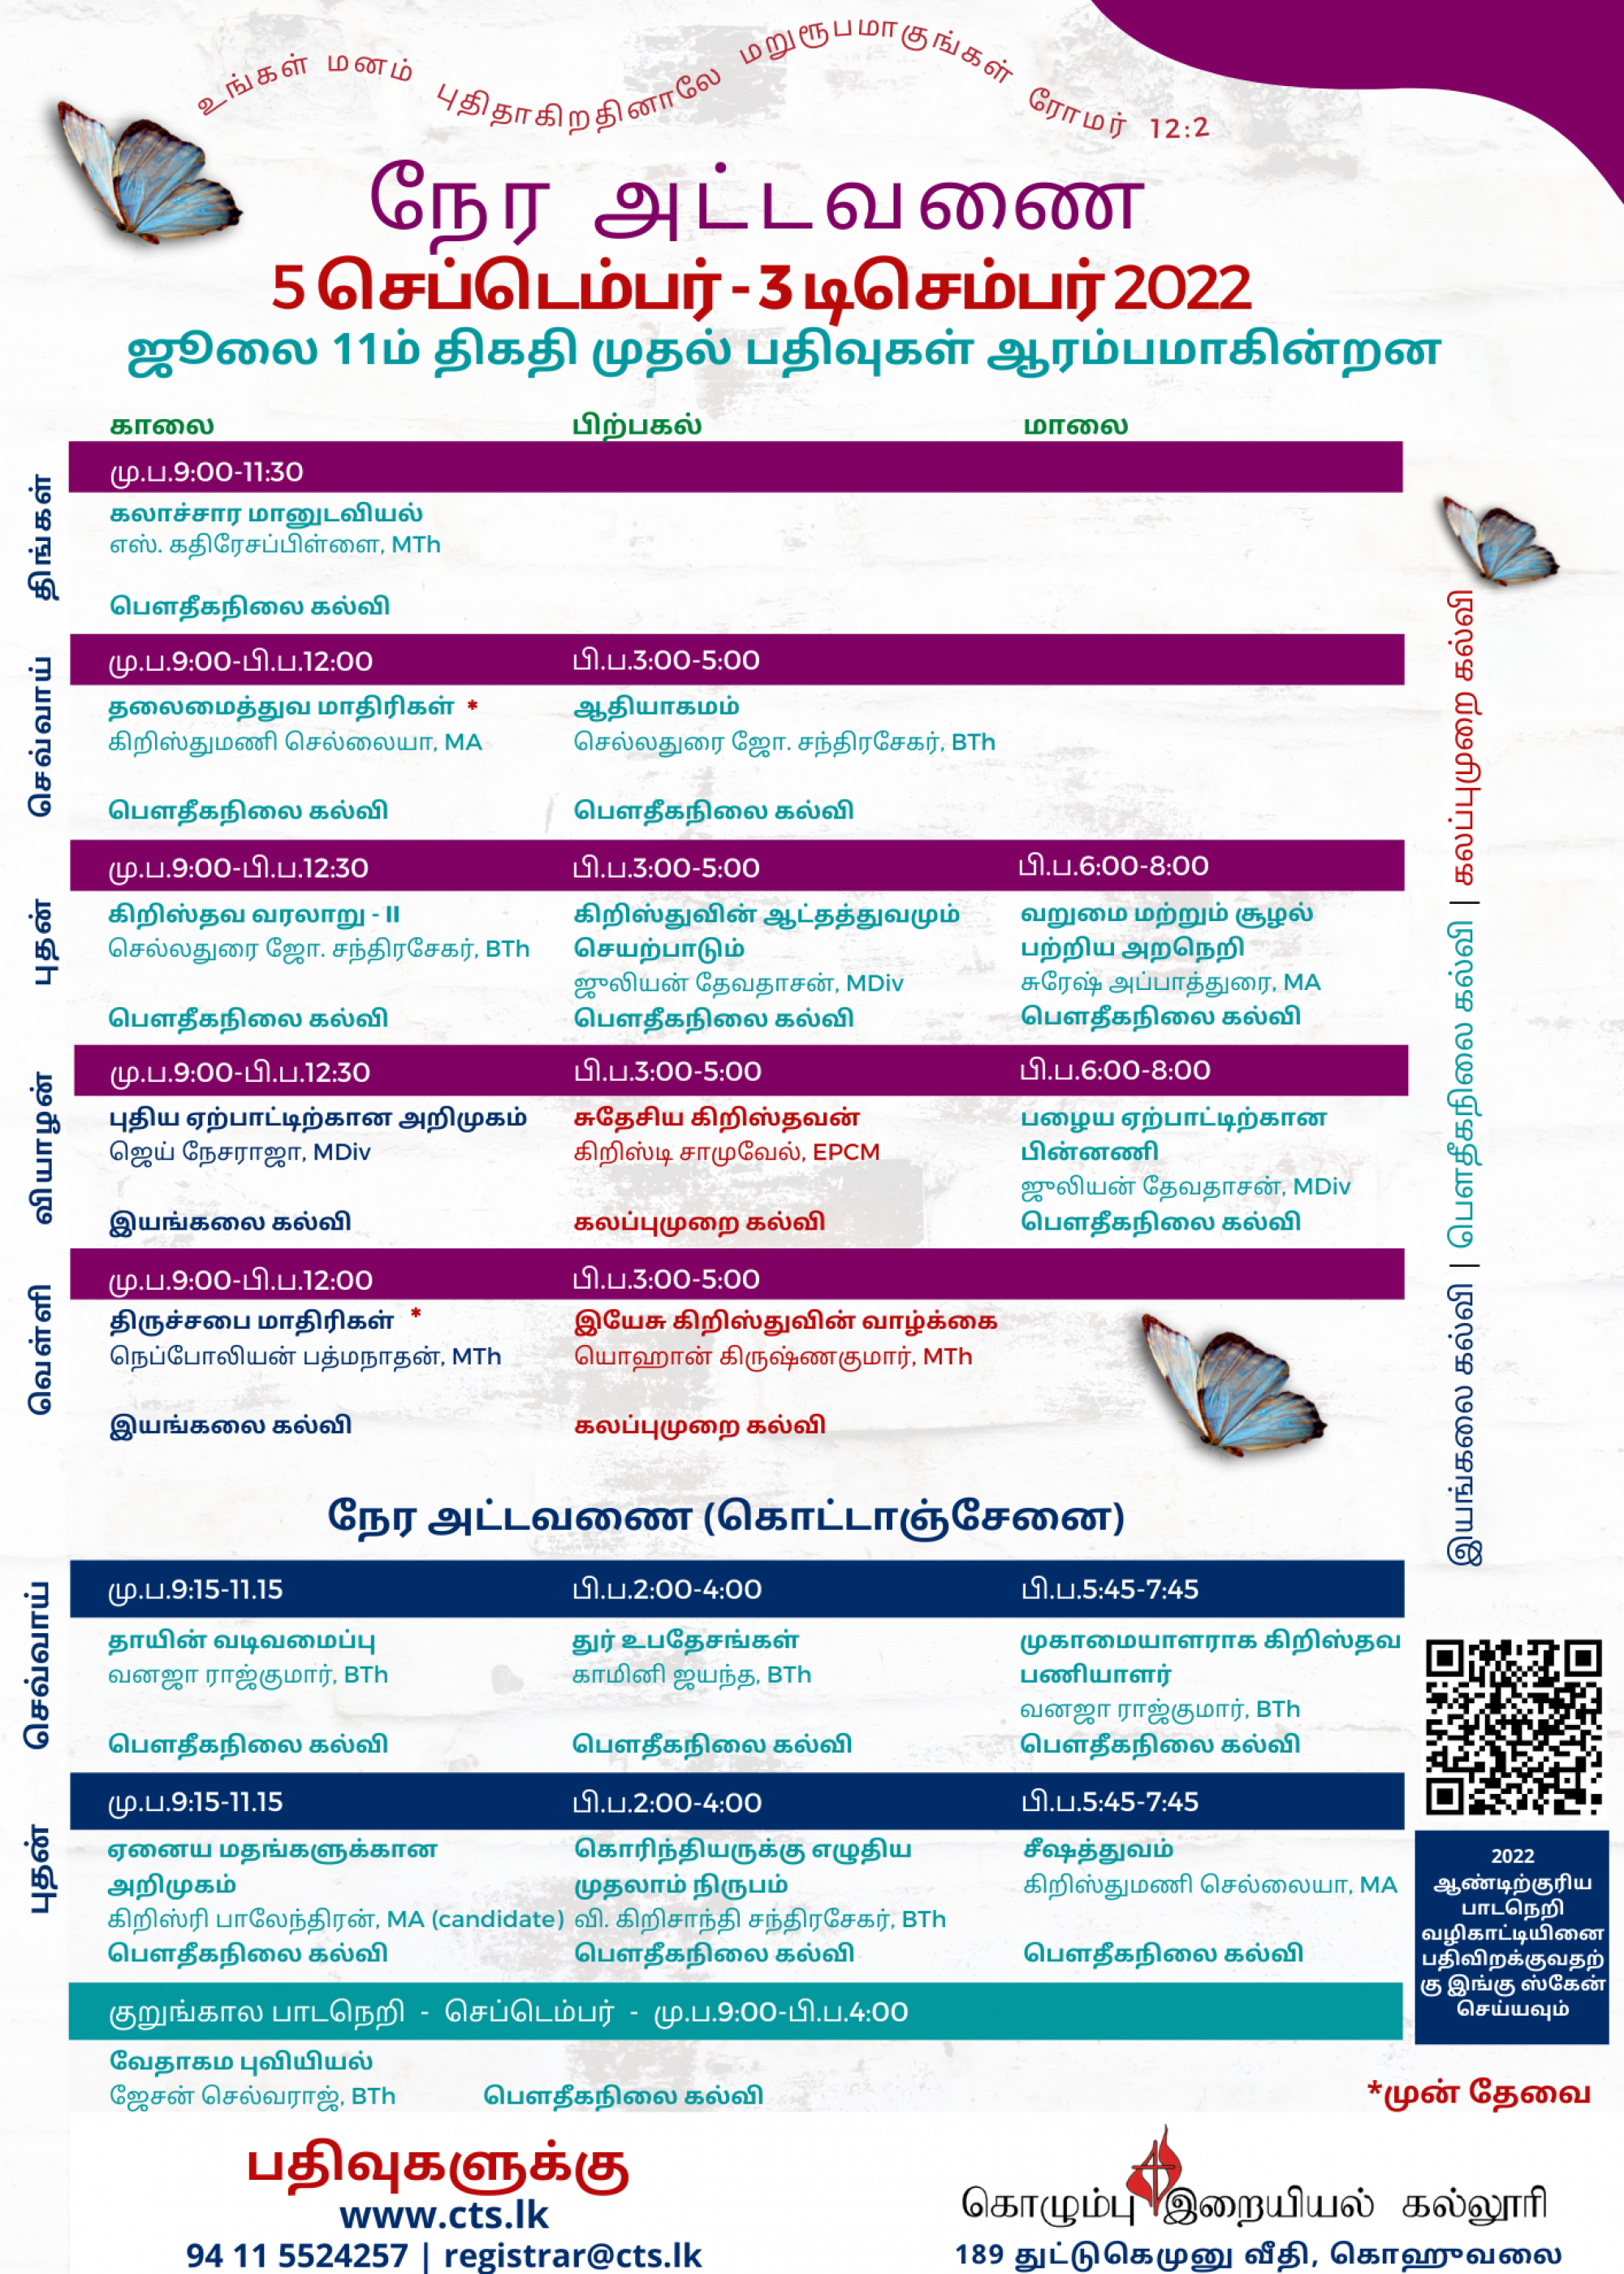 https://www.cts.lk/wp-content/uploads/2022/06/Tamil-2000x2800.png